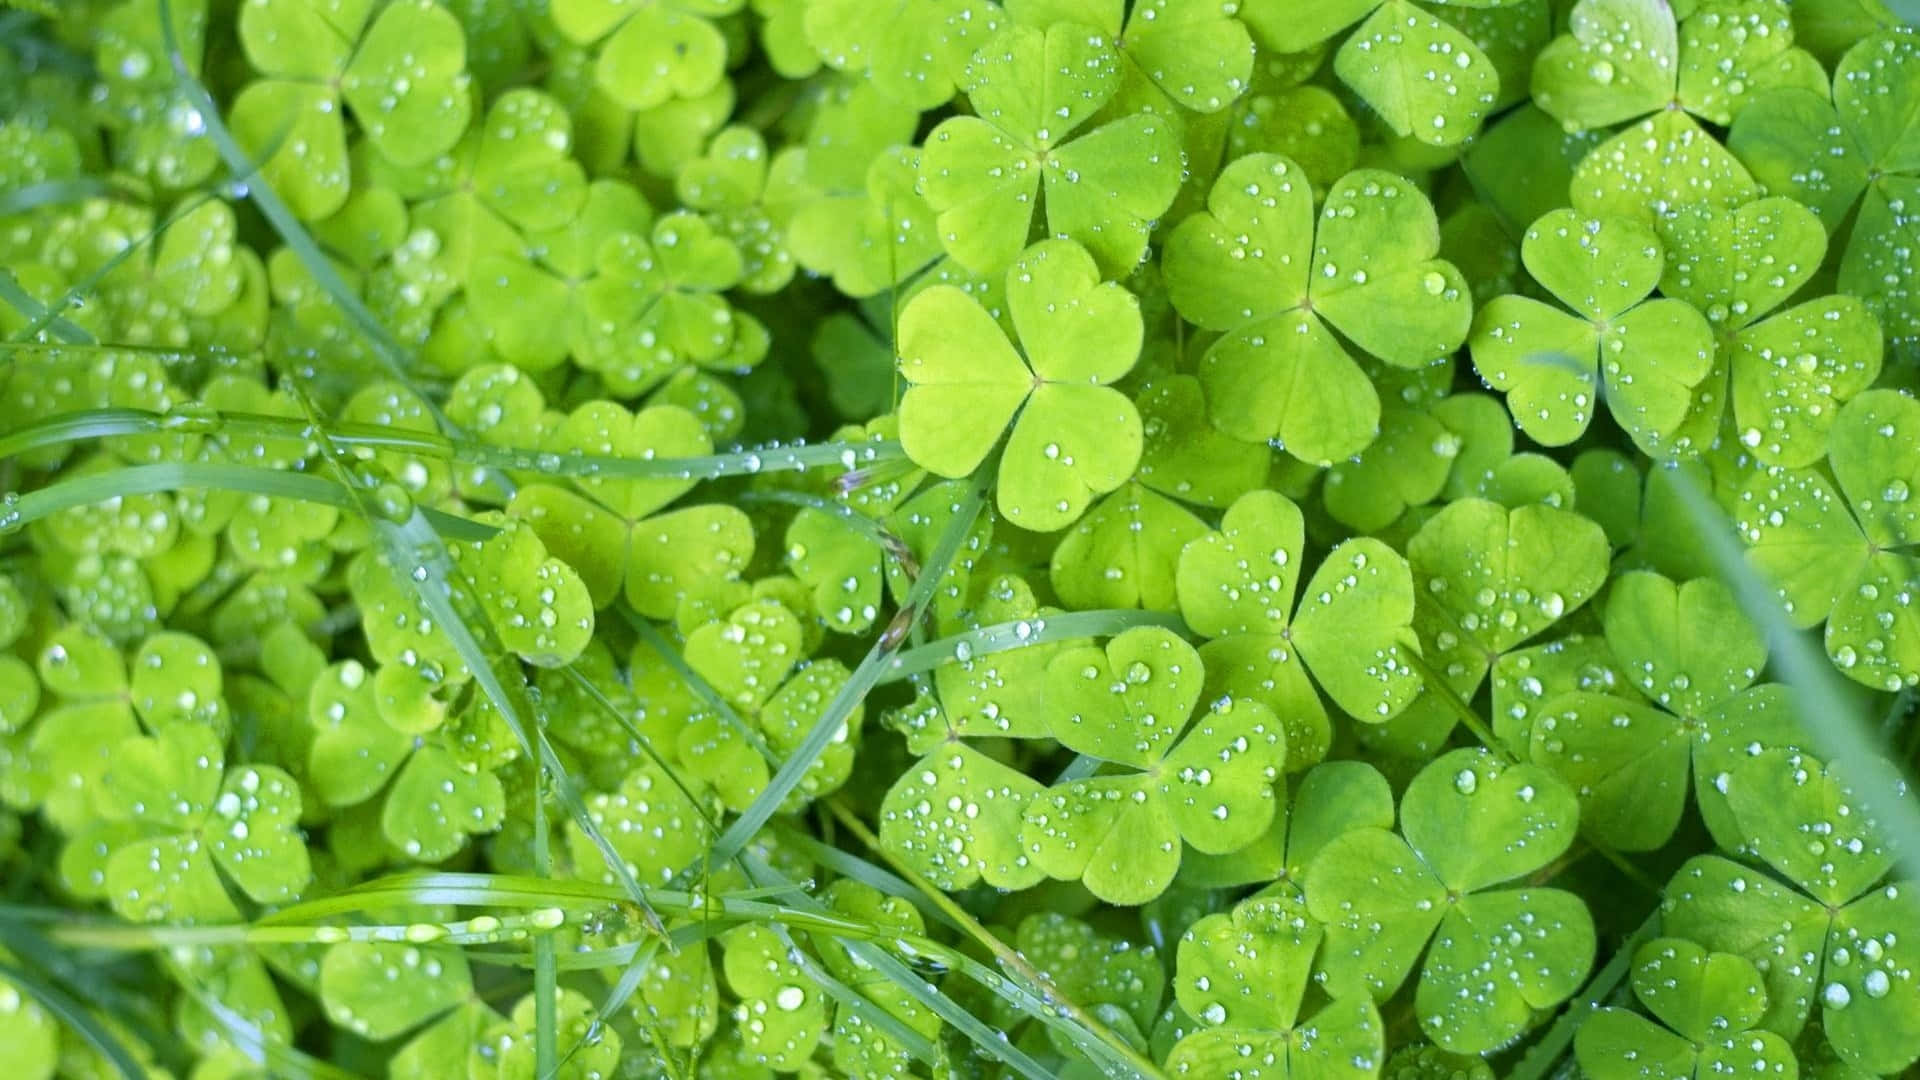 A Close Up Of Green Shamrocks With Water Droplets